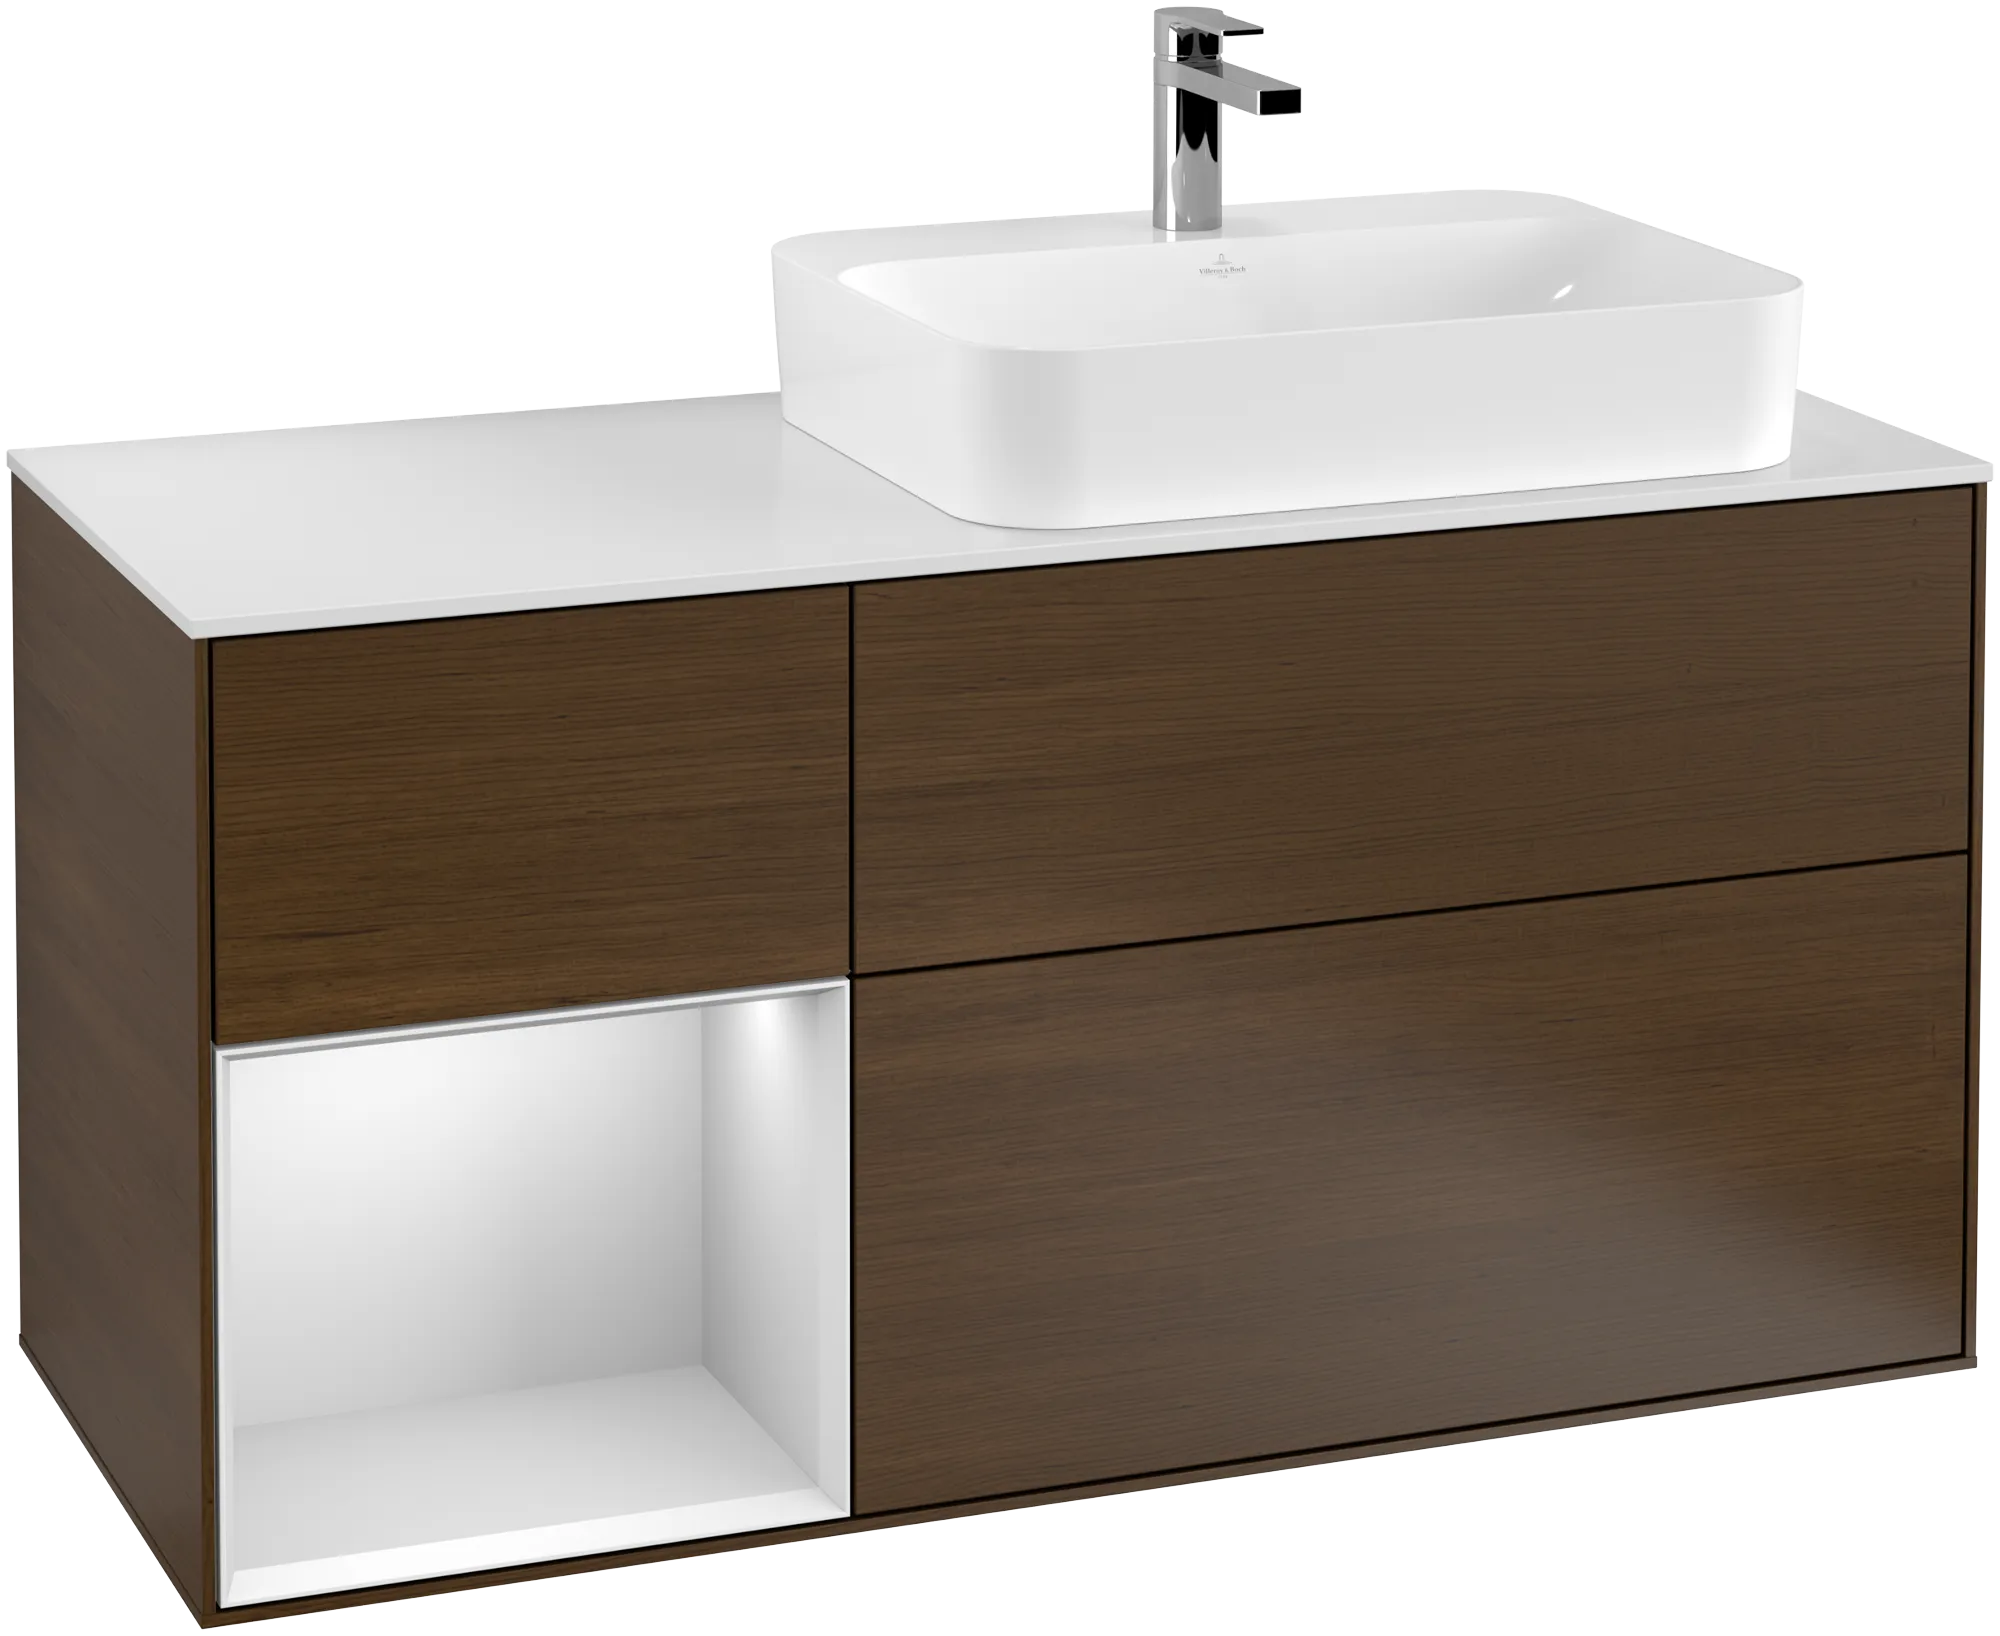 Picture of VILLEROY BOCH Finion Vanity unit, with lighting, 3 pull-out compartments, 1200 x 603 x 501 mm, Walnut Veneer / White Matt Lacquer / Glass White Matt #G391MTGN